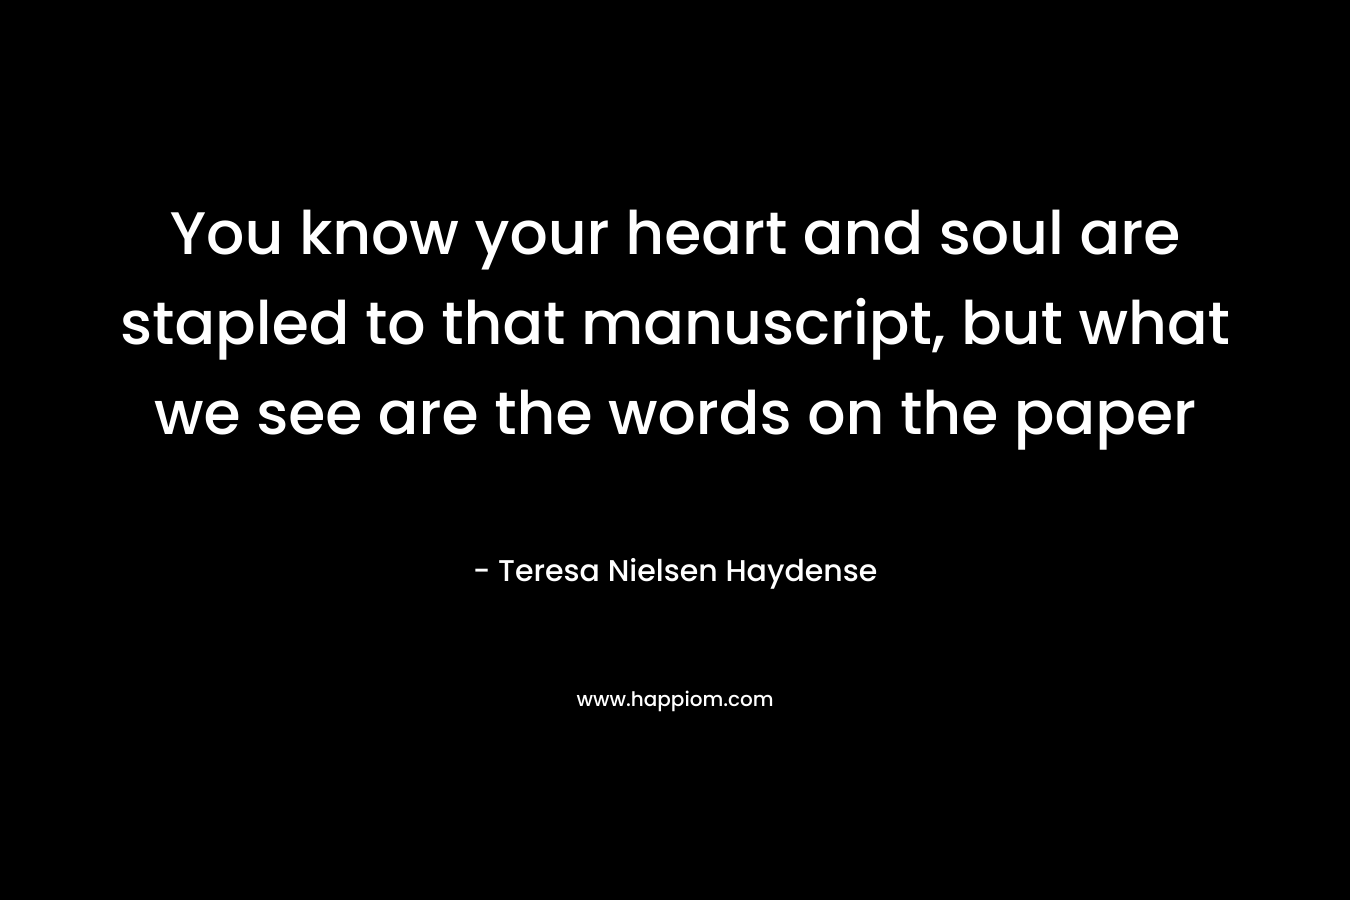 You know your heart and soul are stapled to that manuscript, but what we see are the words on the paper – Teresa Nielsen Haydense